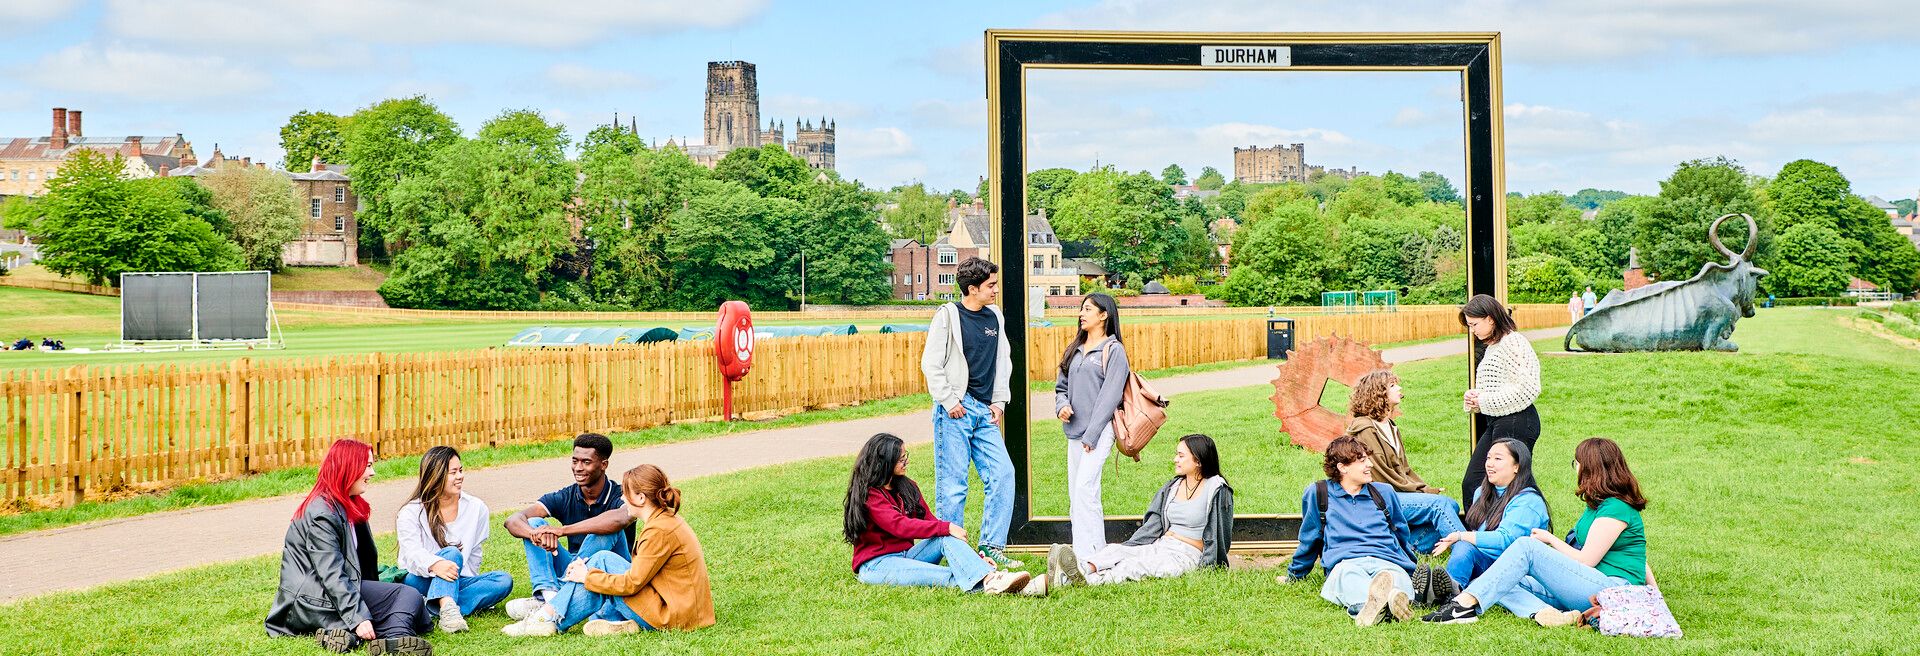 Students sit and stand in groups on the banks of the River Wear. It's a busy shot, with lots going on. They are all dressed in jeans and light jackets. Some are leaning against a large black frame, with 